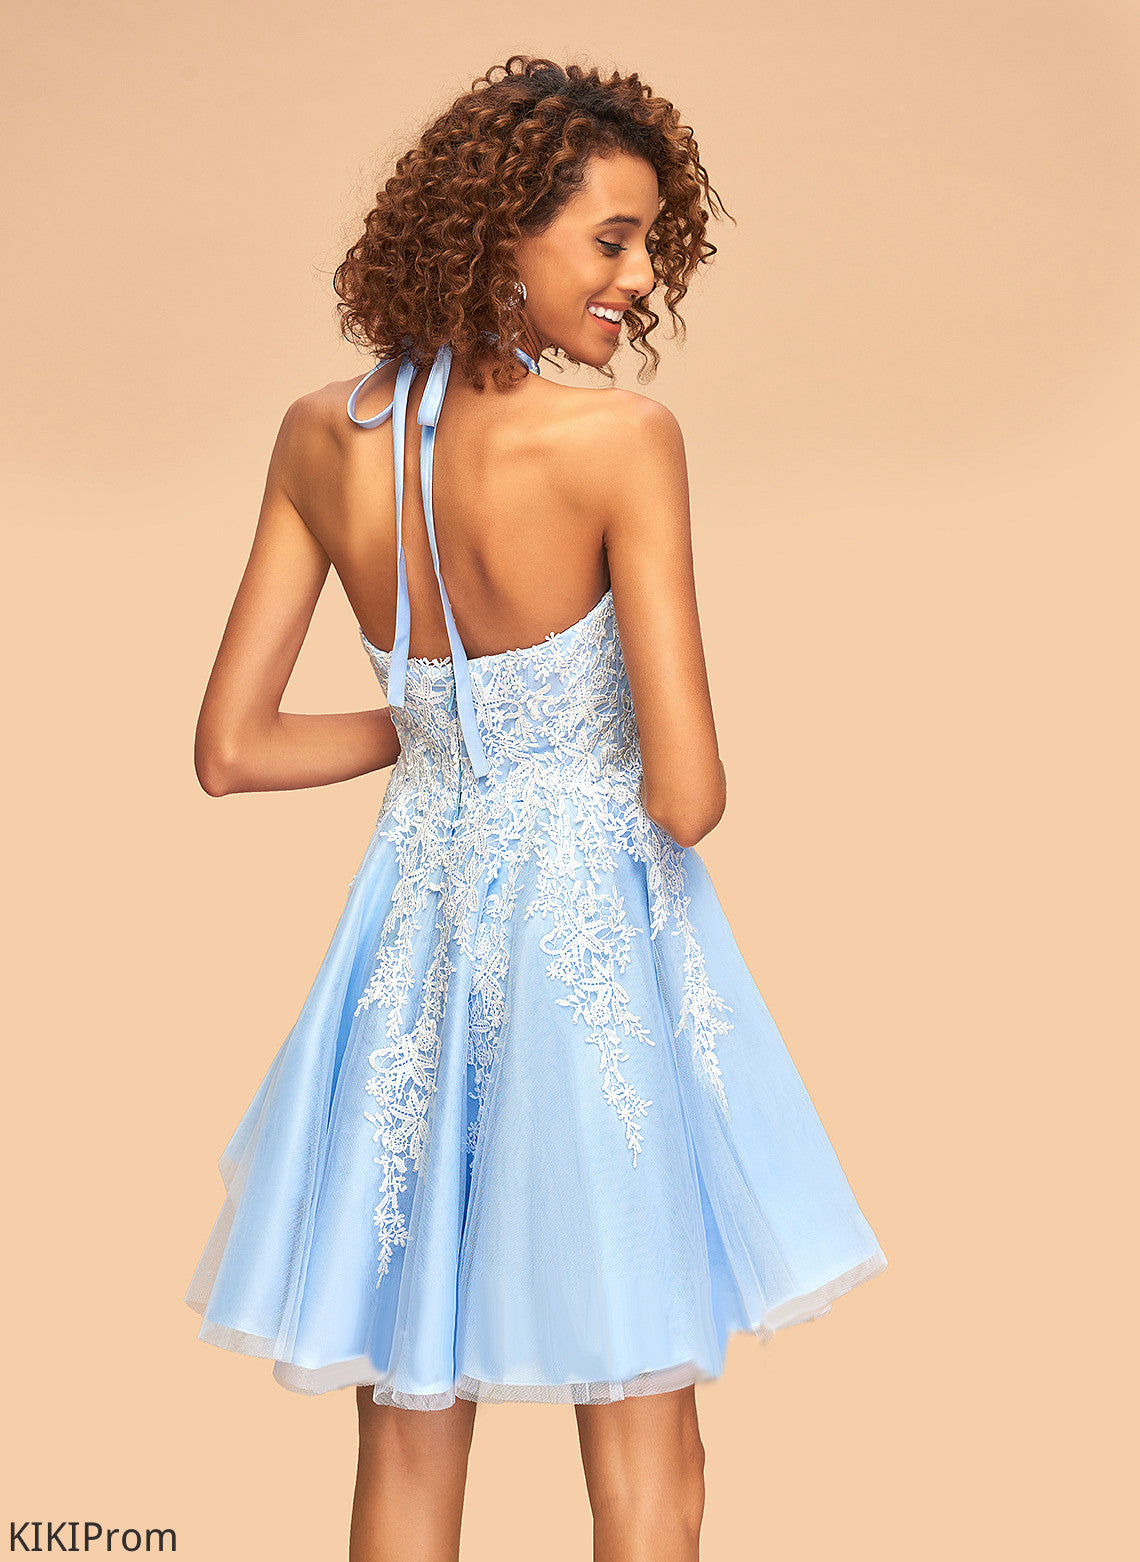 Homecoming Dresses With Gina Dress Short/Mini A-Line Lace Tulle Halter Homecoming